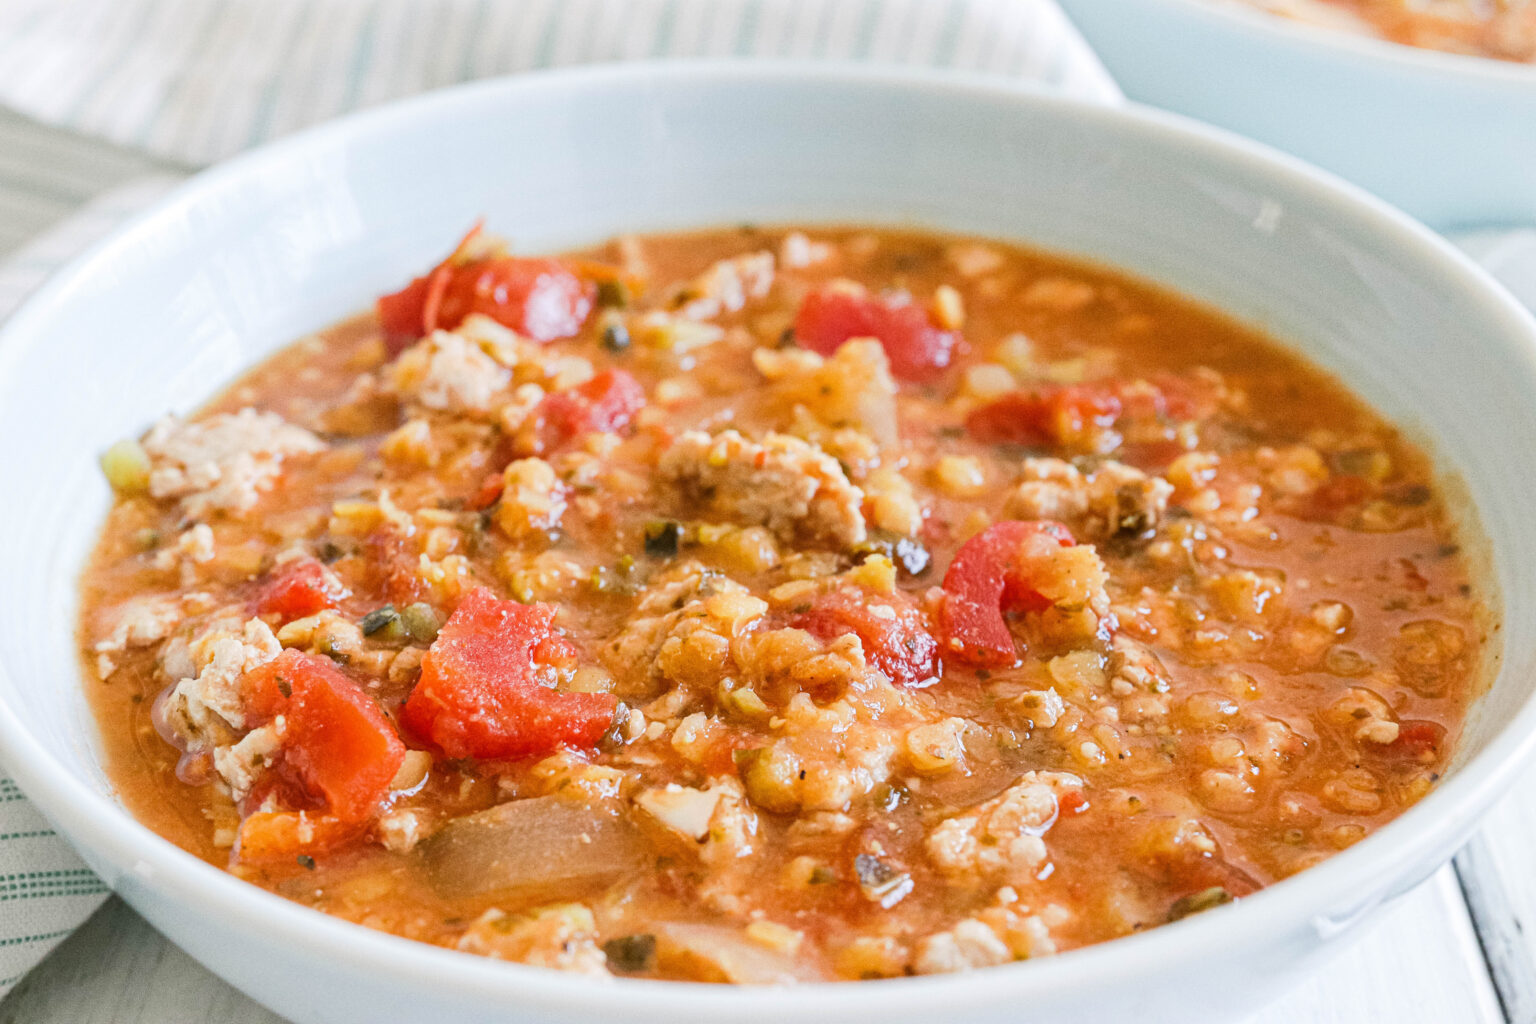 Curry Lentil And Turkey Stew Recipe - Nikki's Plate